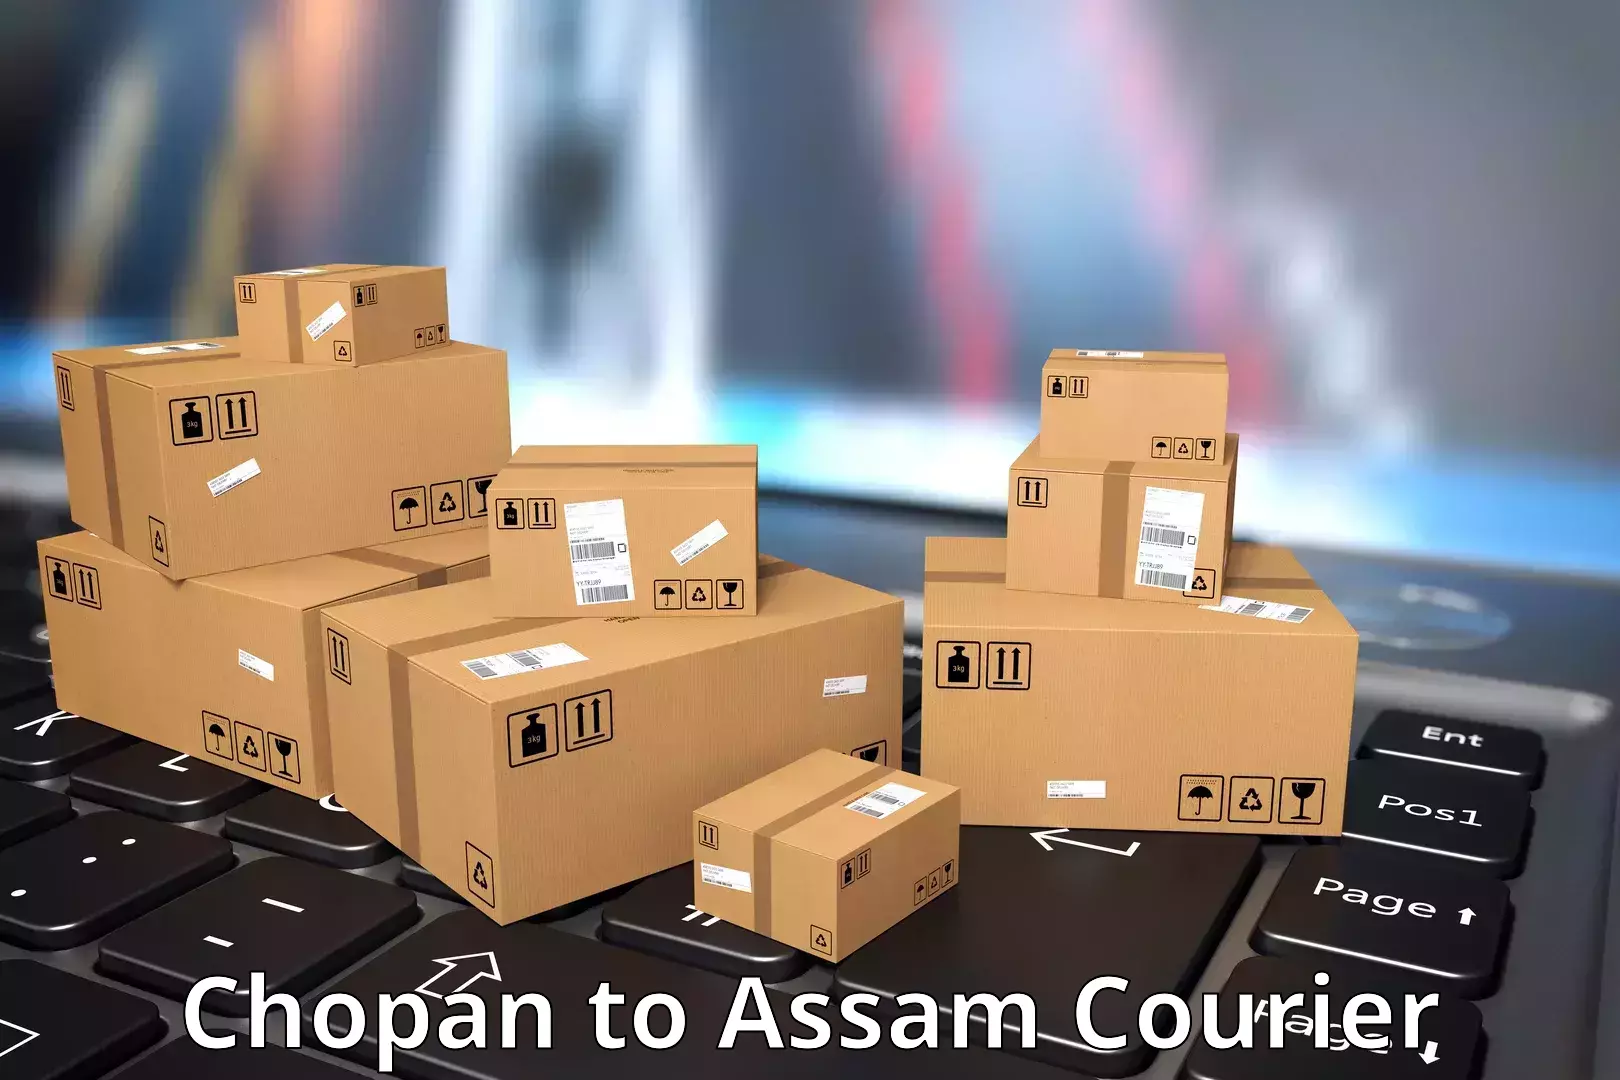 Express package services Chopan to Assam